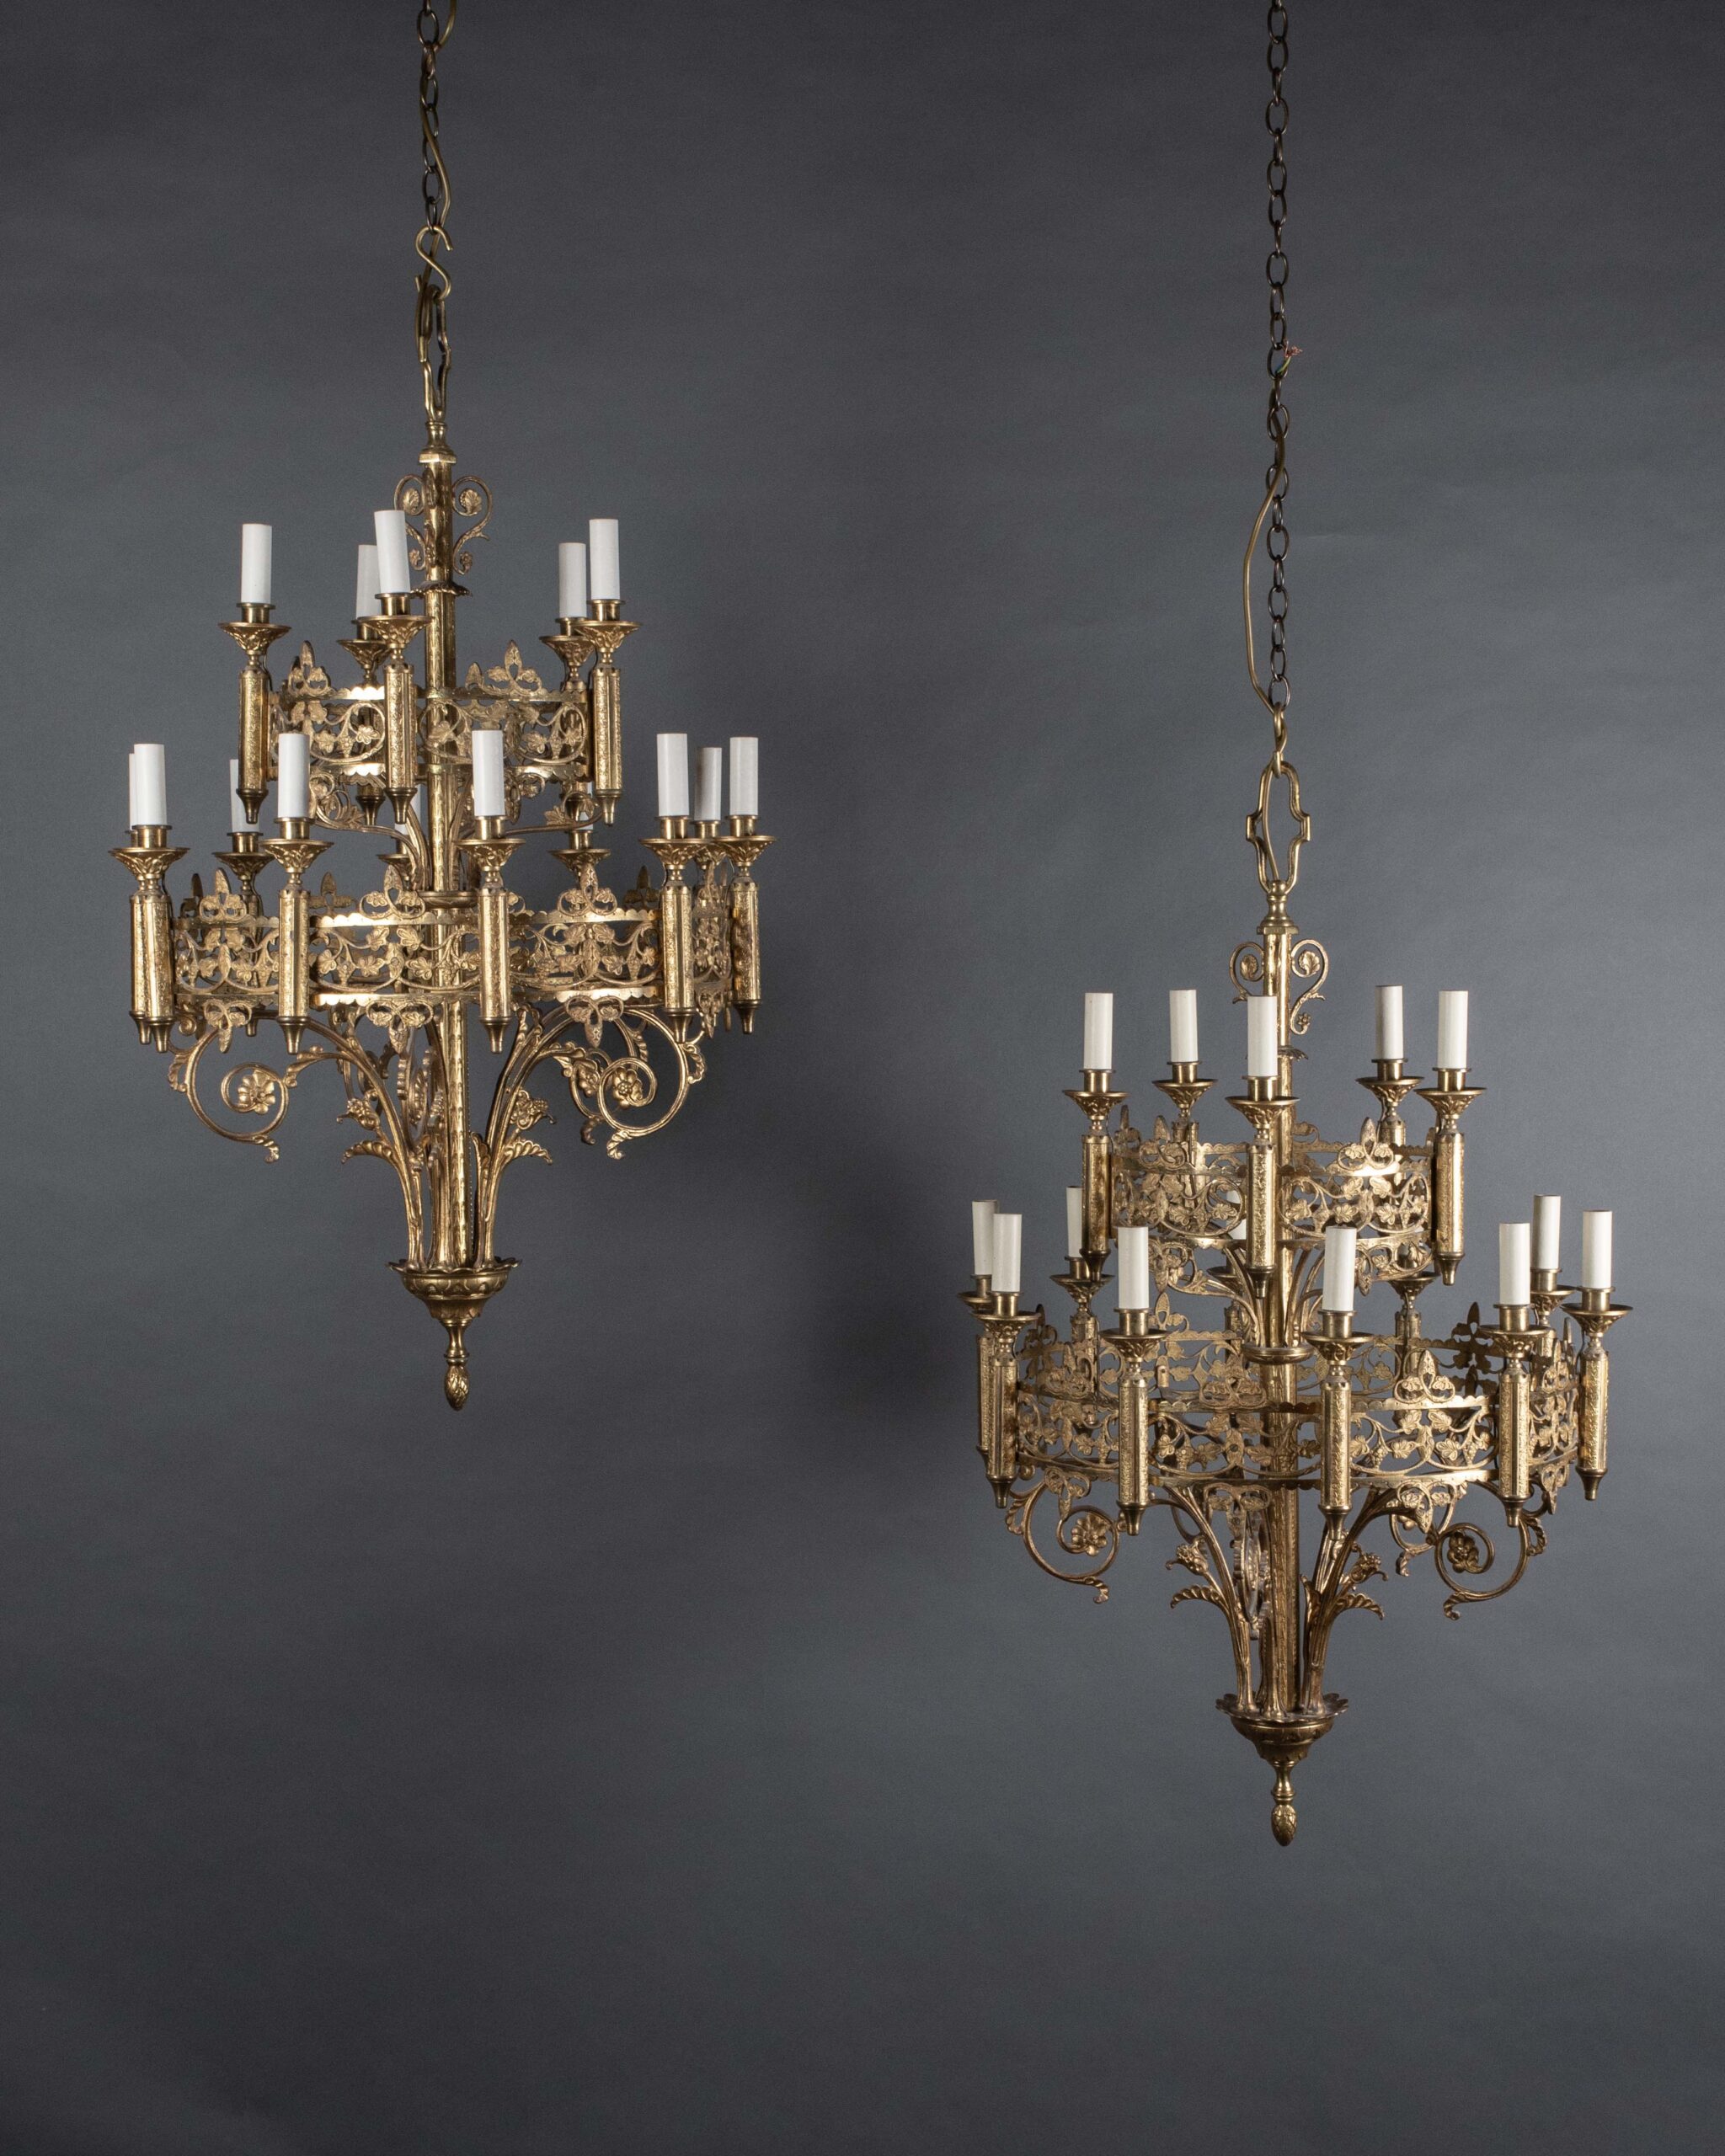 Pair of ornate gothic chandeliers made of gilt with 2 tiers hung side by side